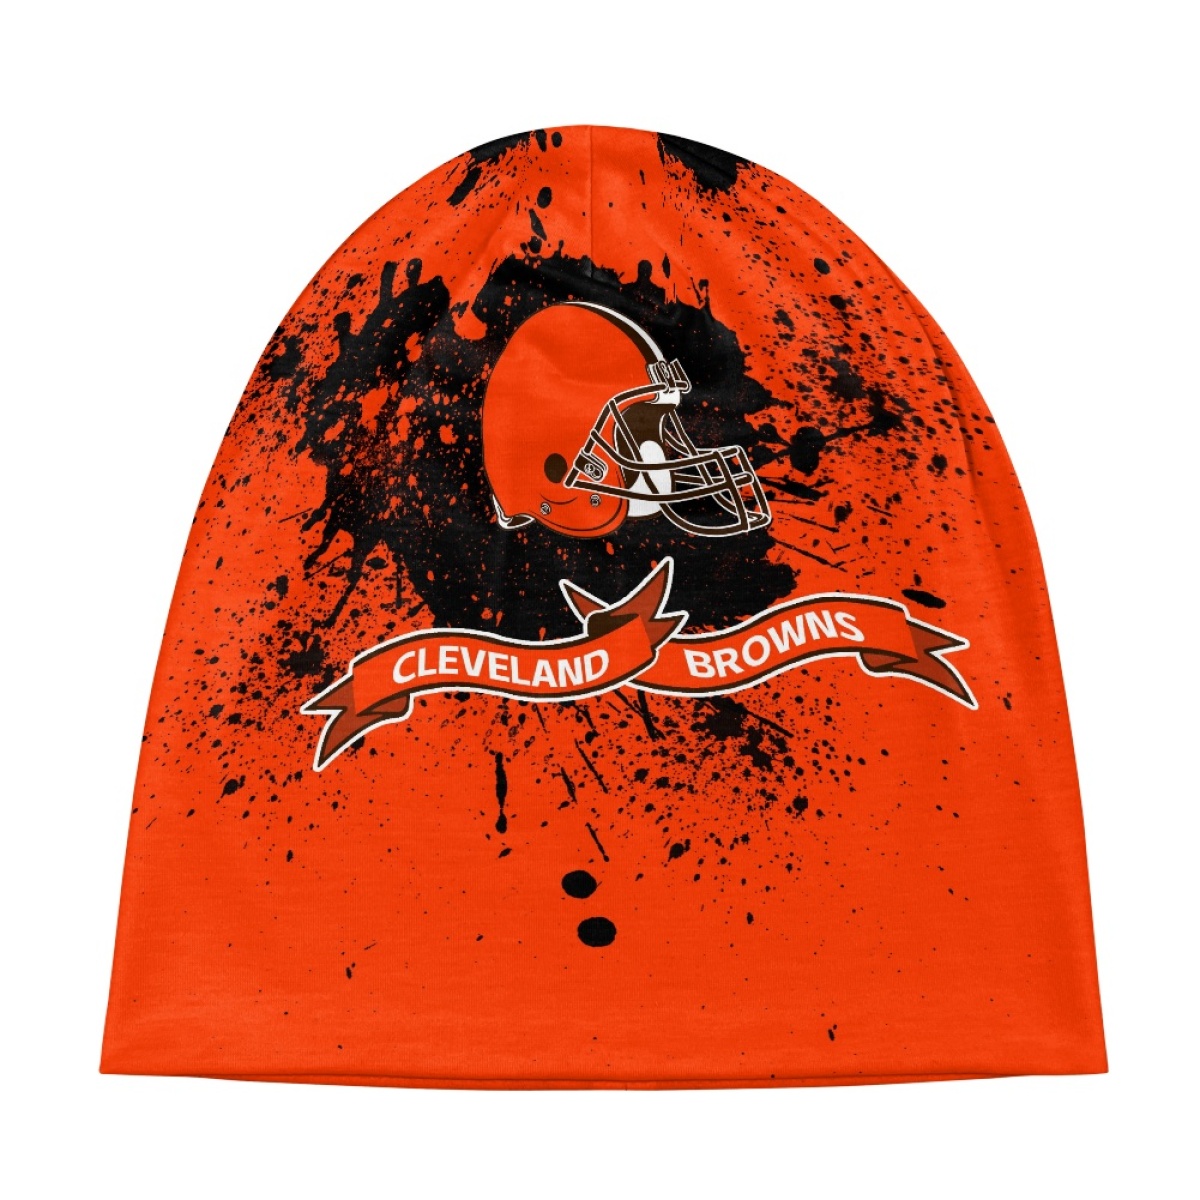 Cleveland Browns Baggy Skull Hats 081